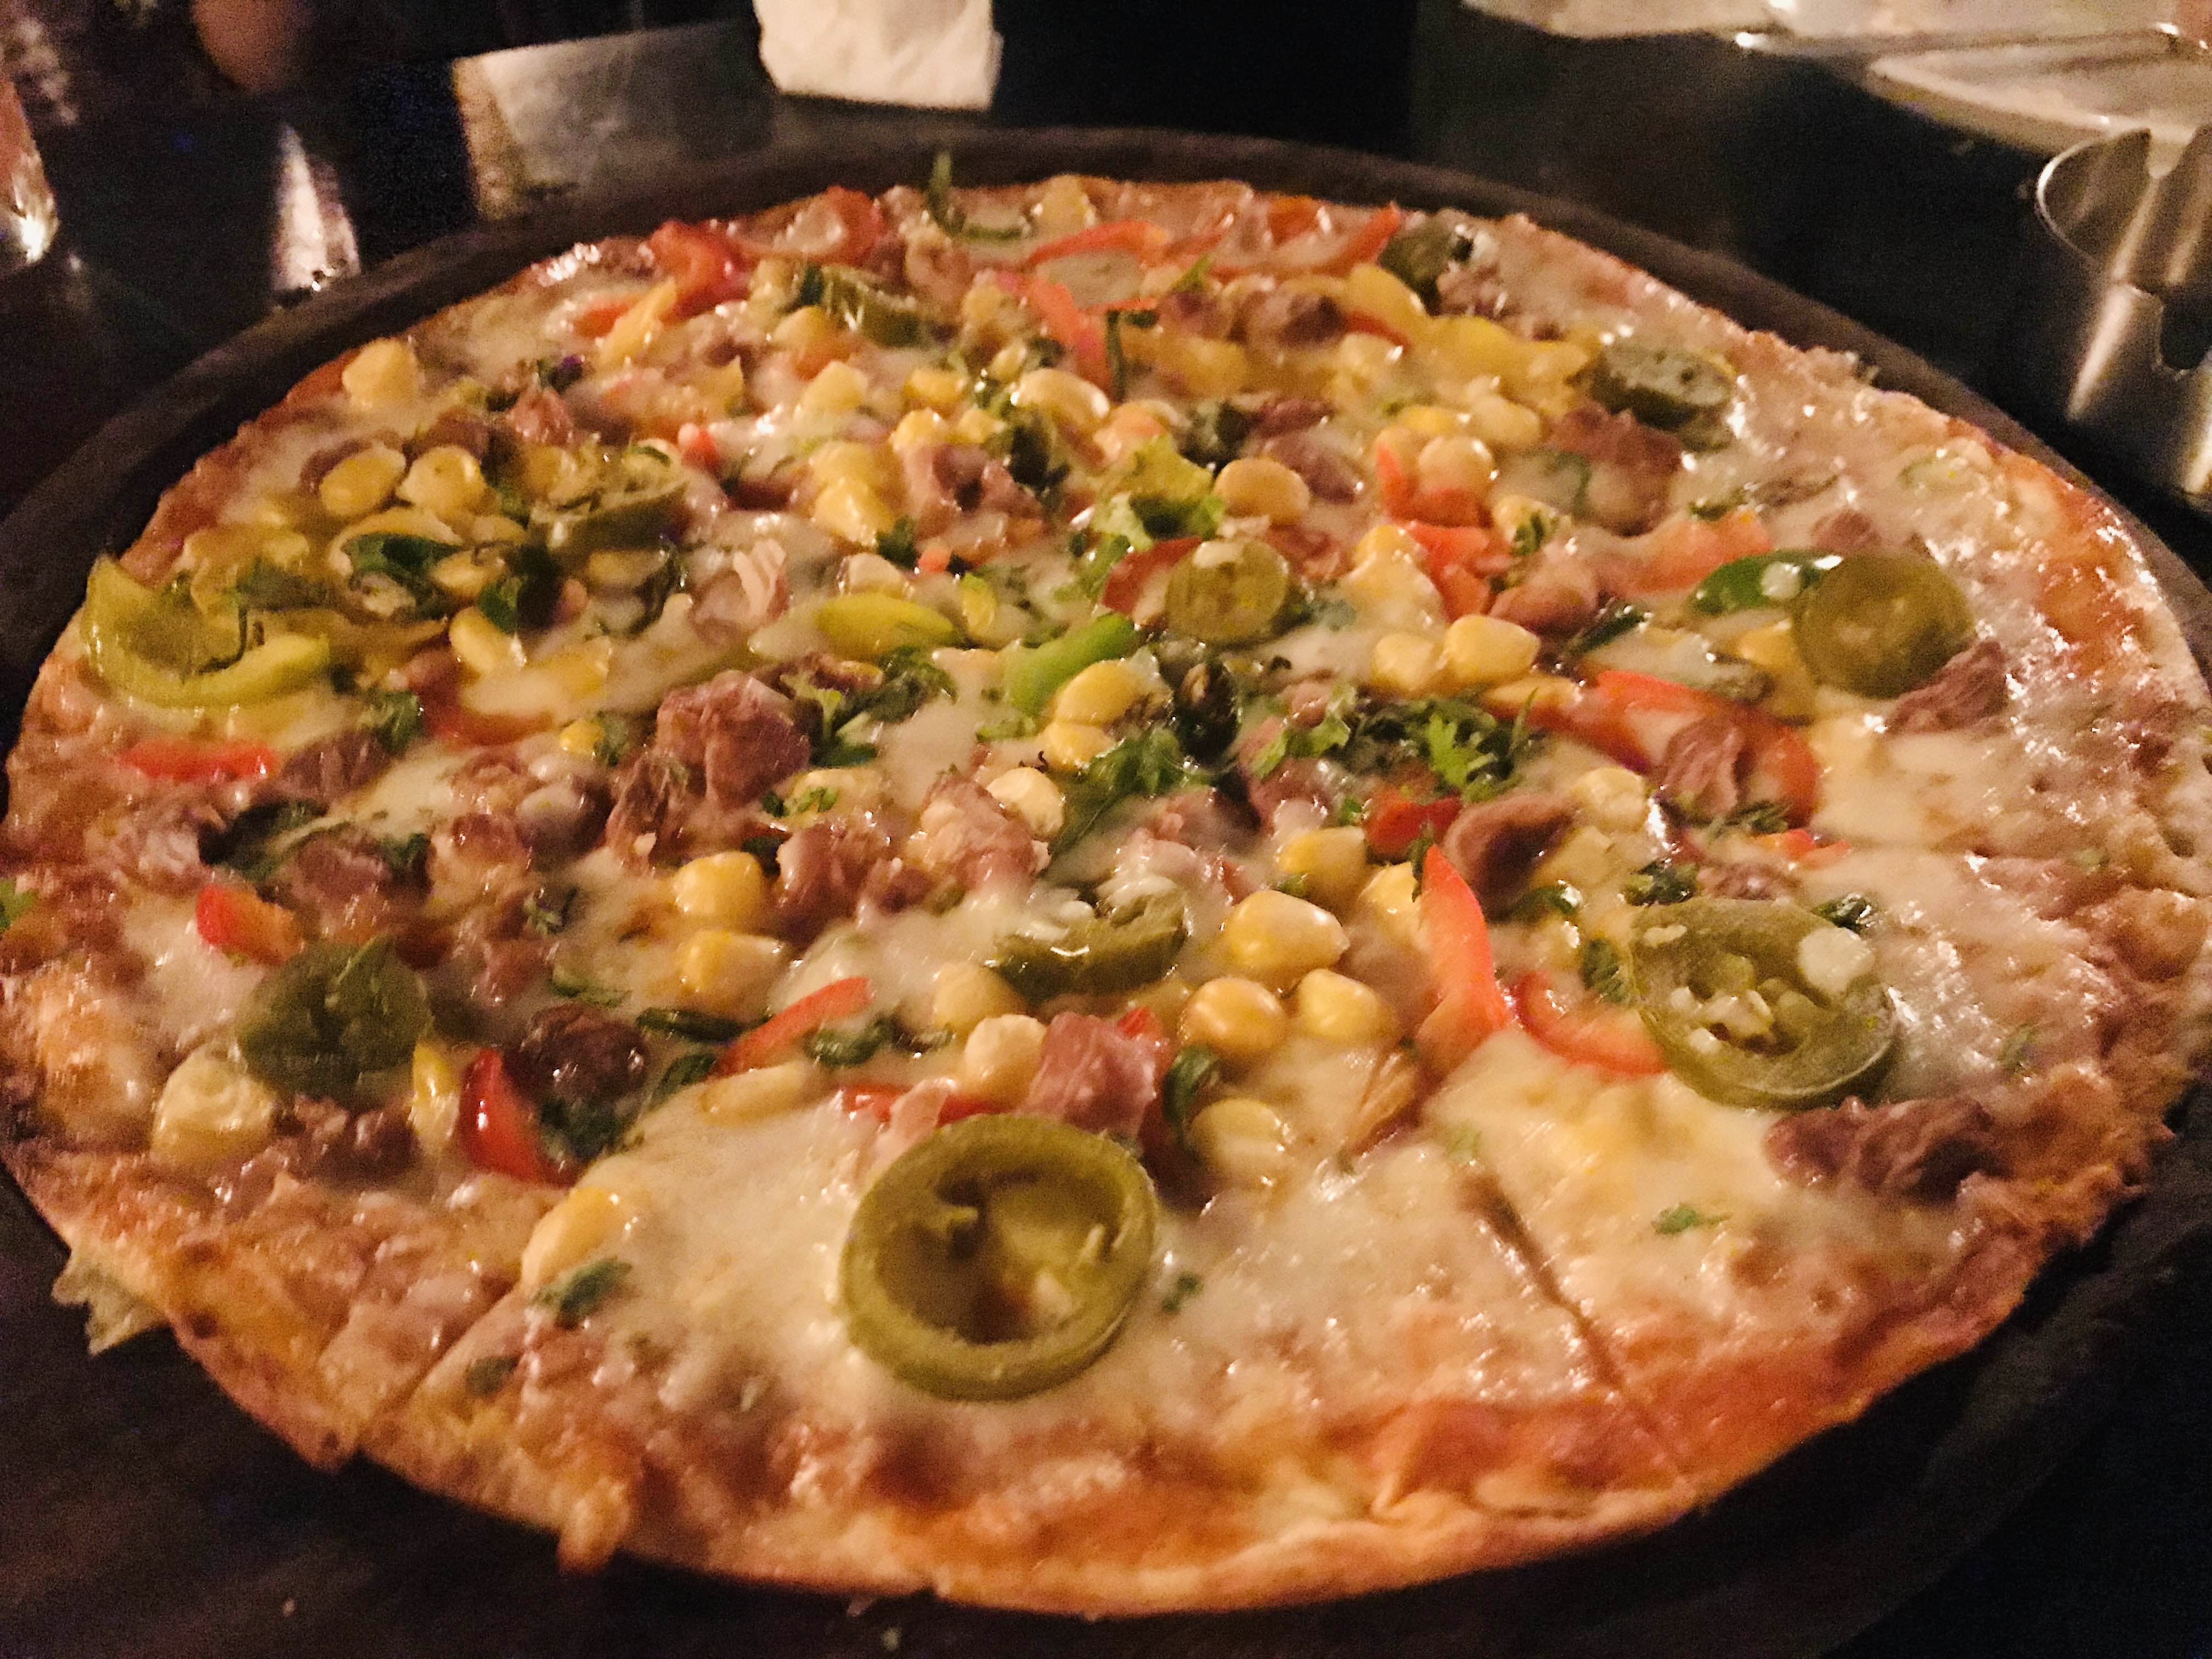 Dish,Food,Cuisine,Pizza,California-style pizza,Ingredient,Pizza cheese,Meat,Italian food,Produce